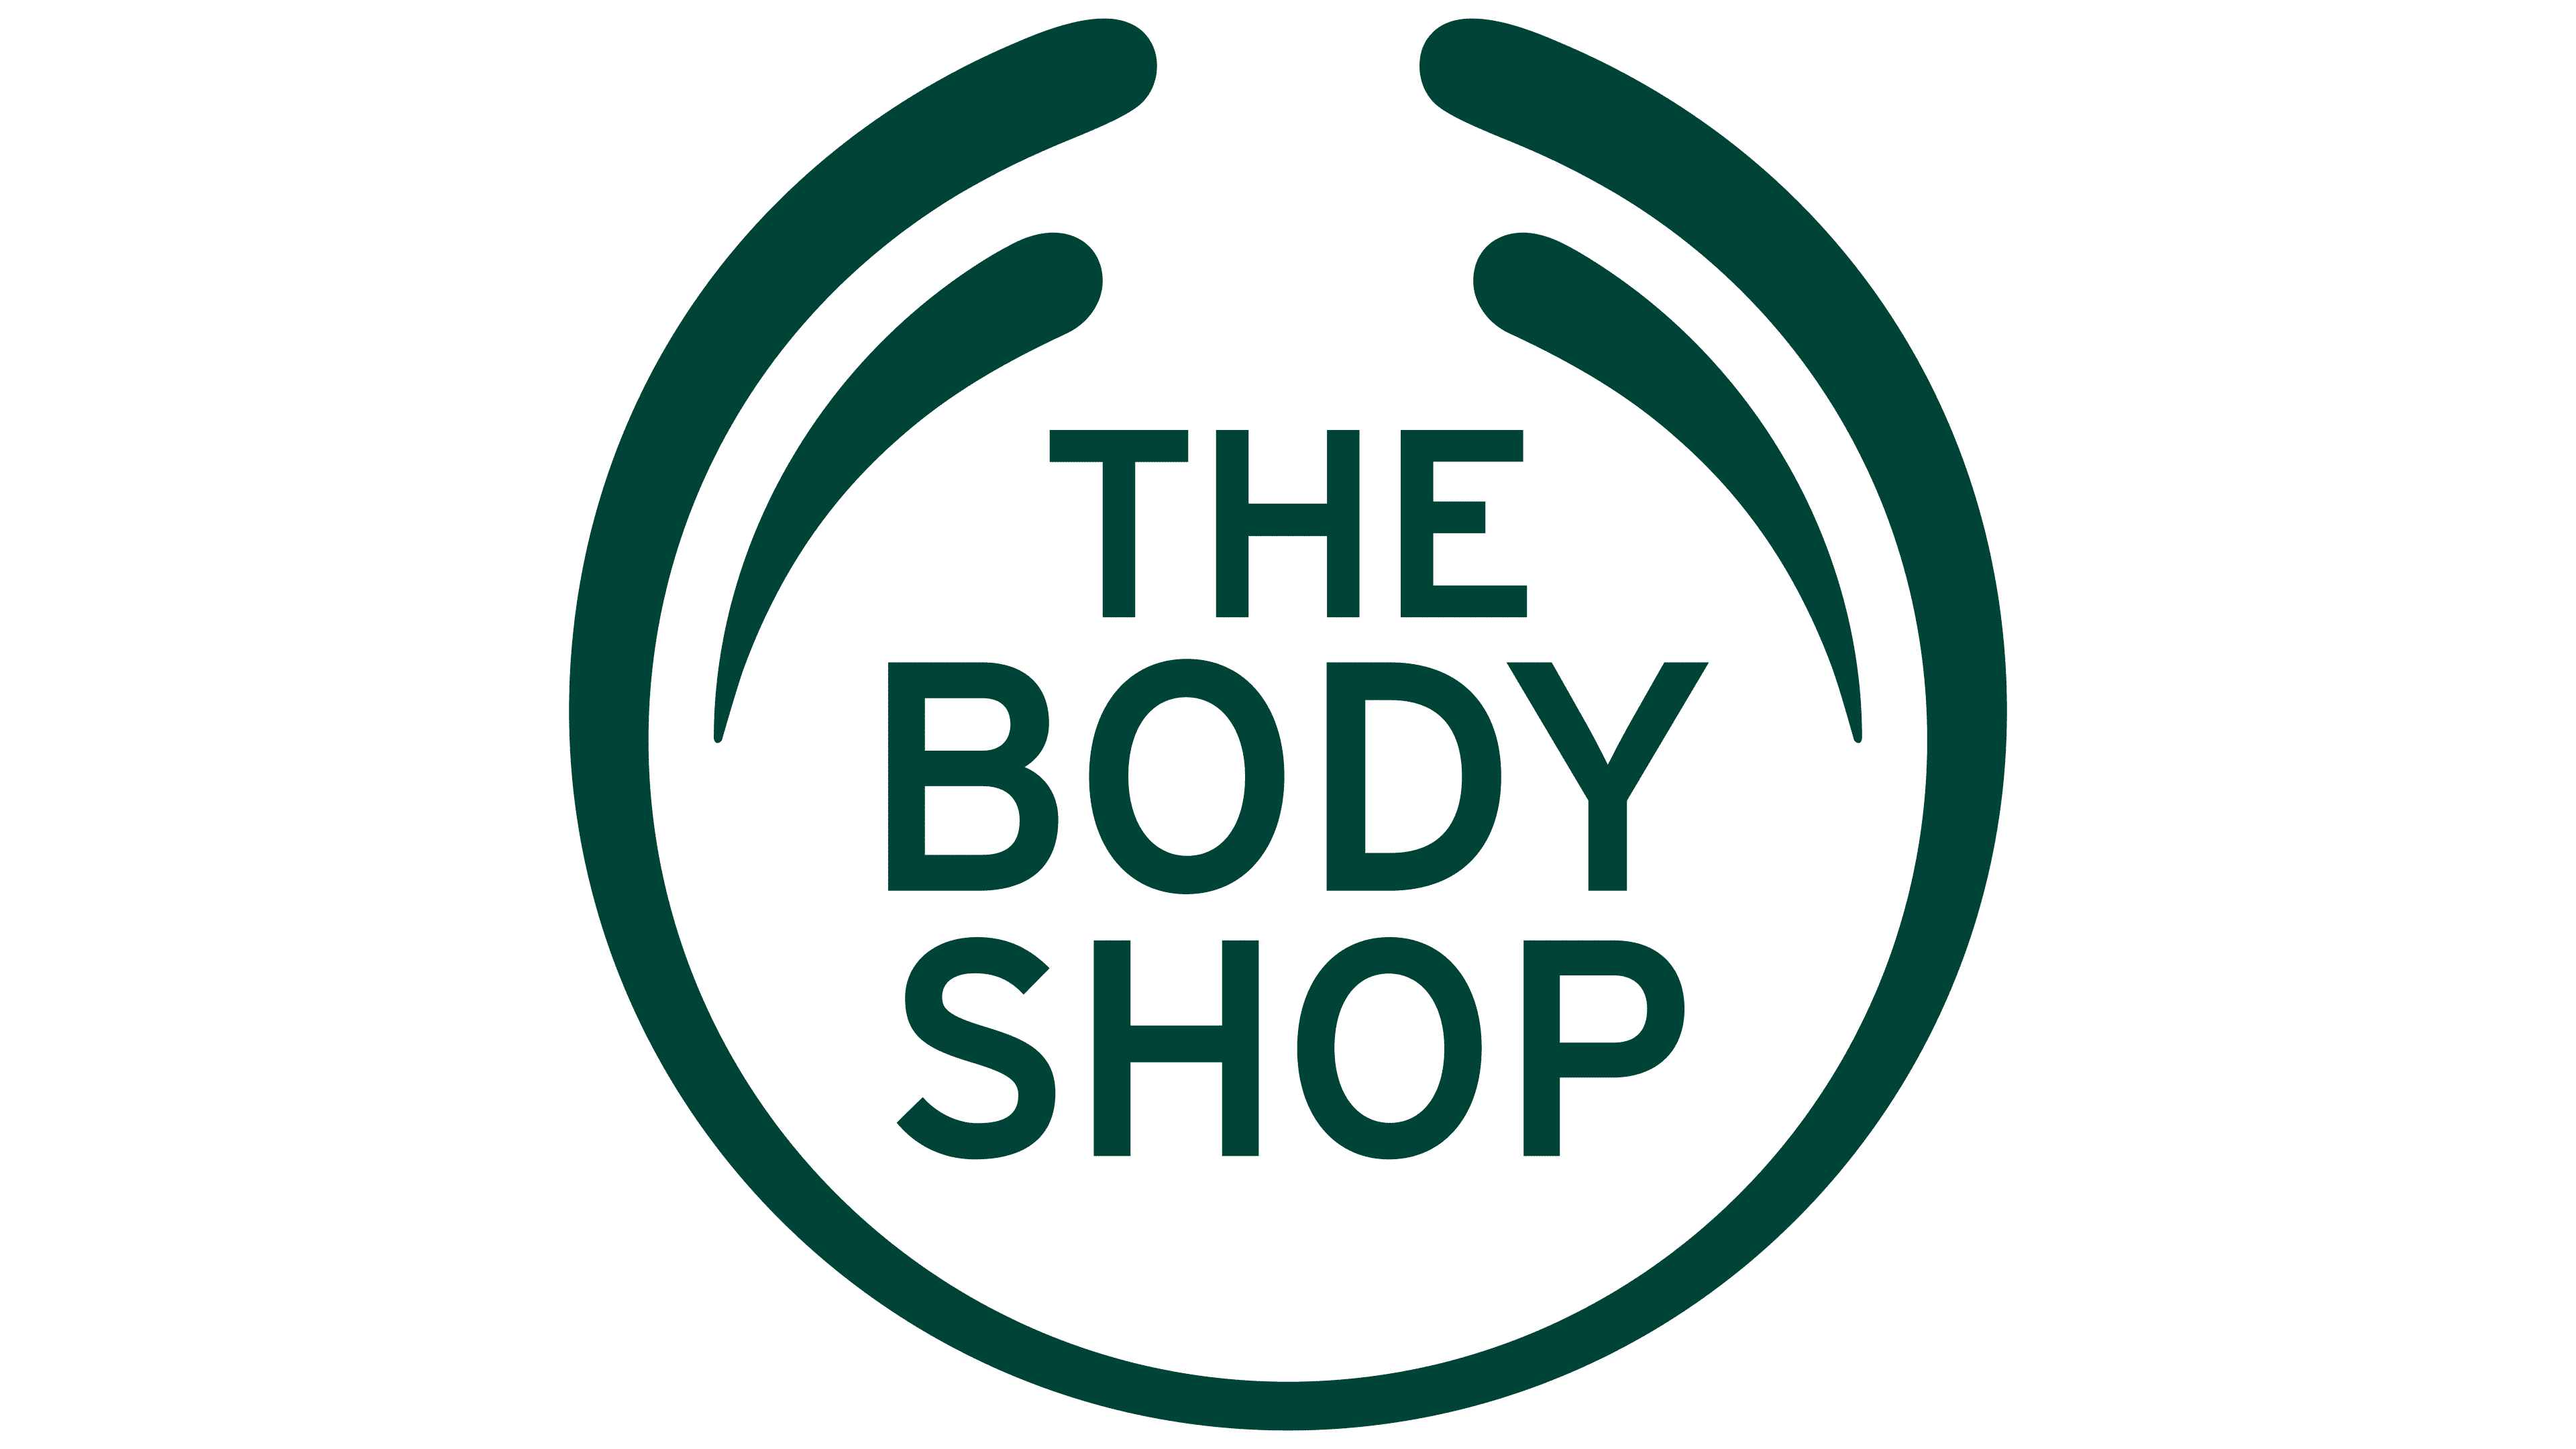 The Body Shop - Shower in Savings! 2 Shower Gels for £14, 3 for £20, 4 for £24!